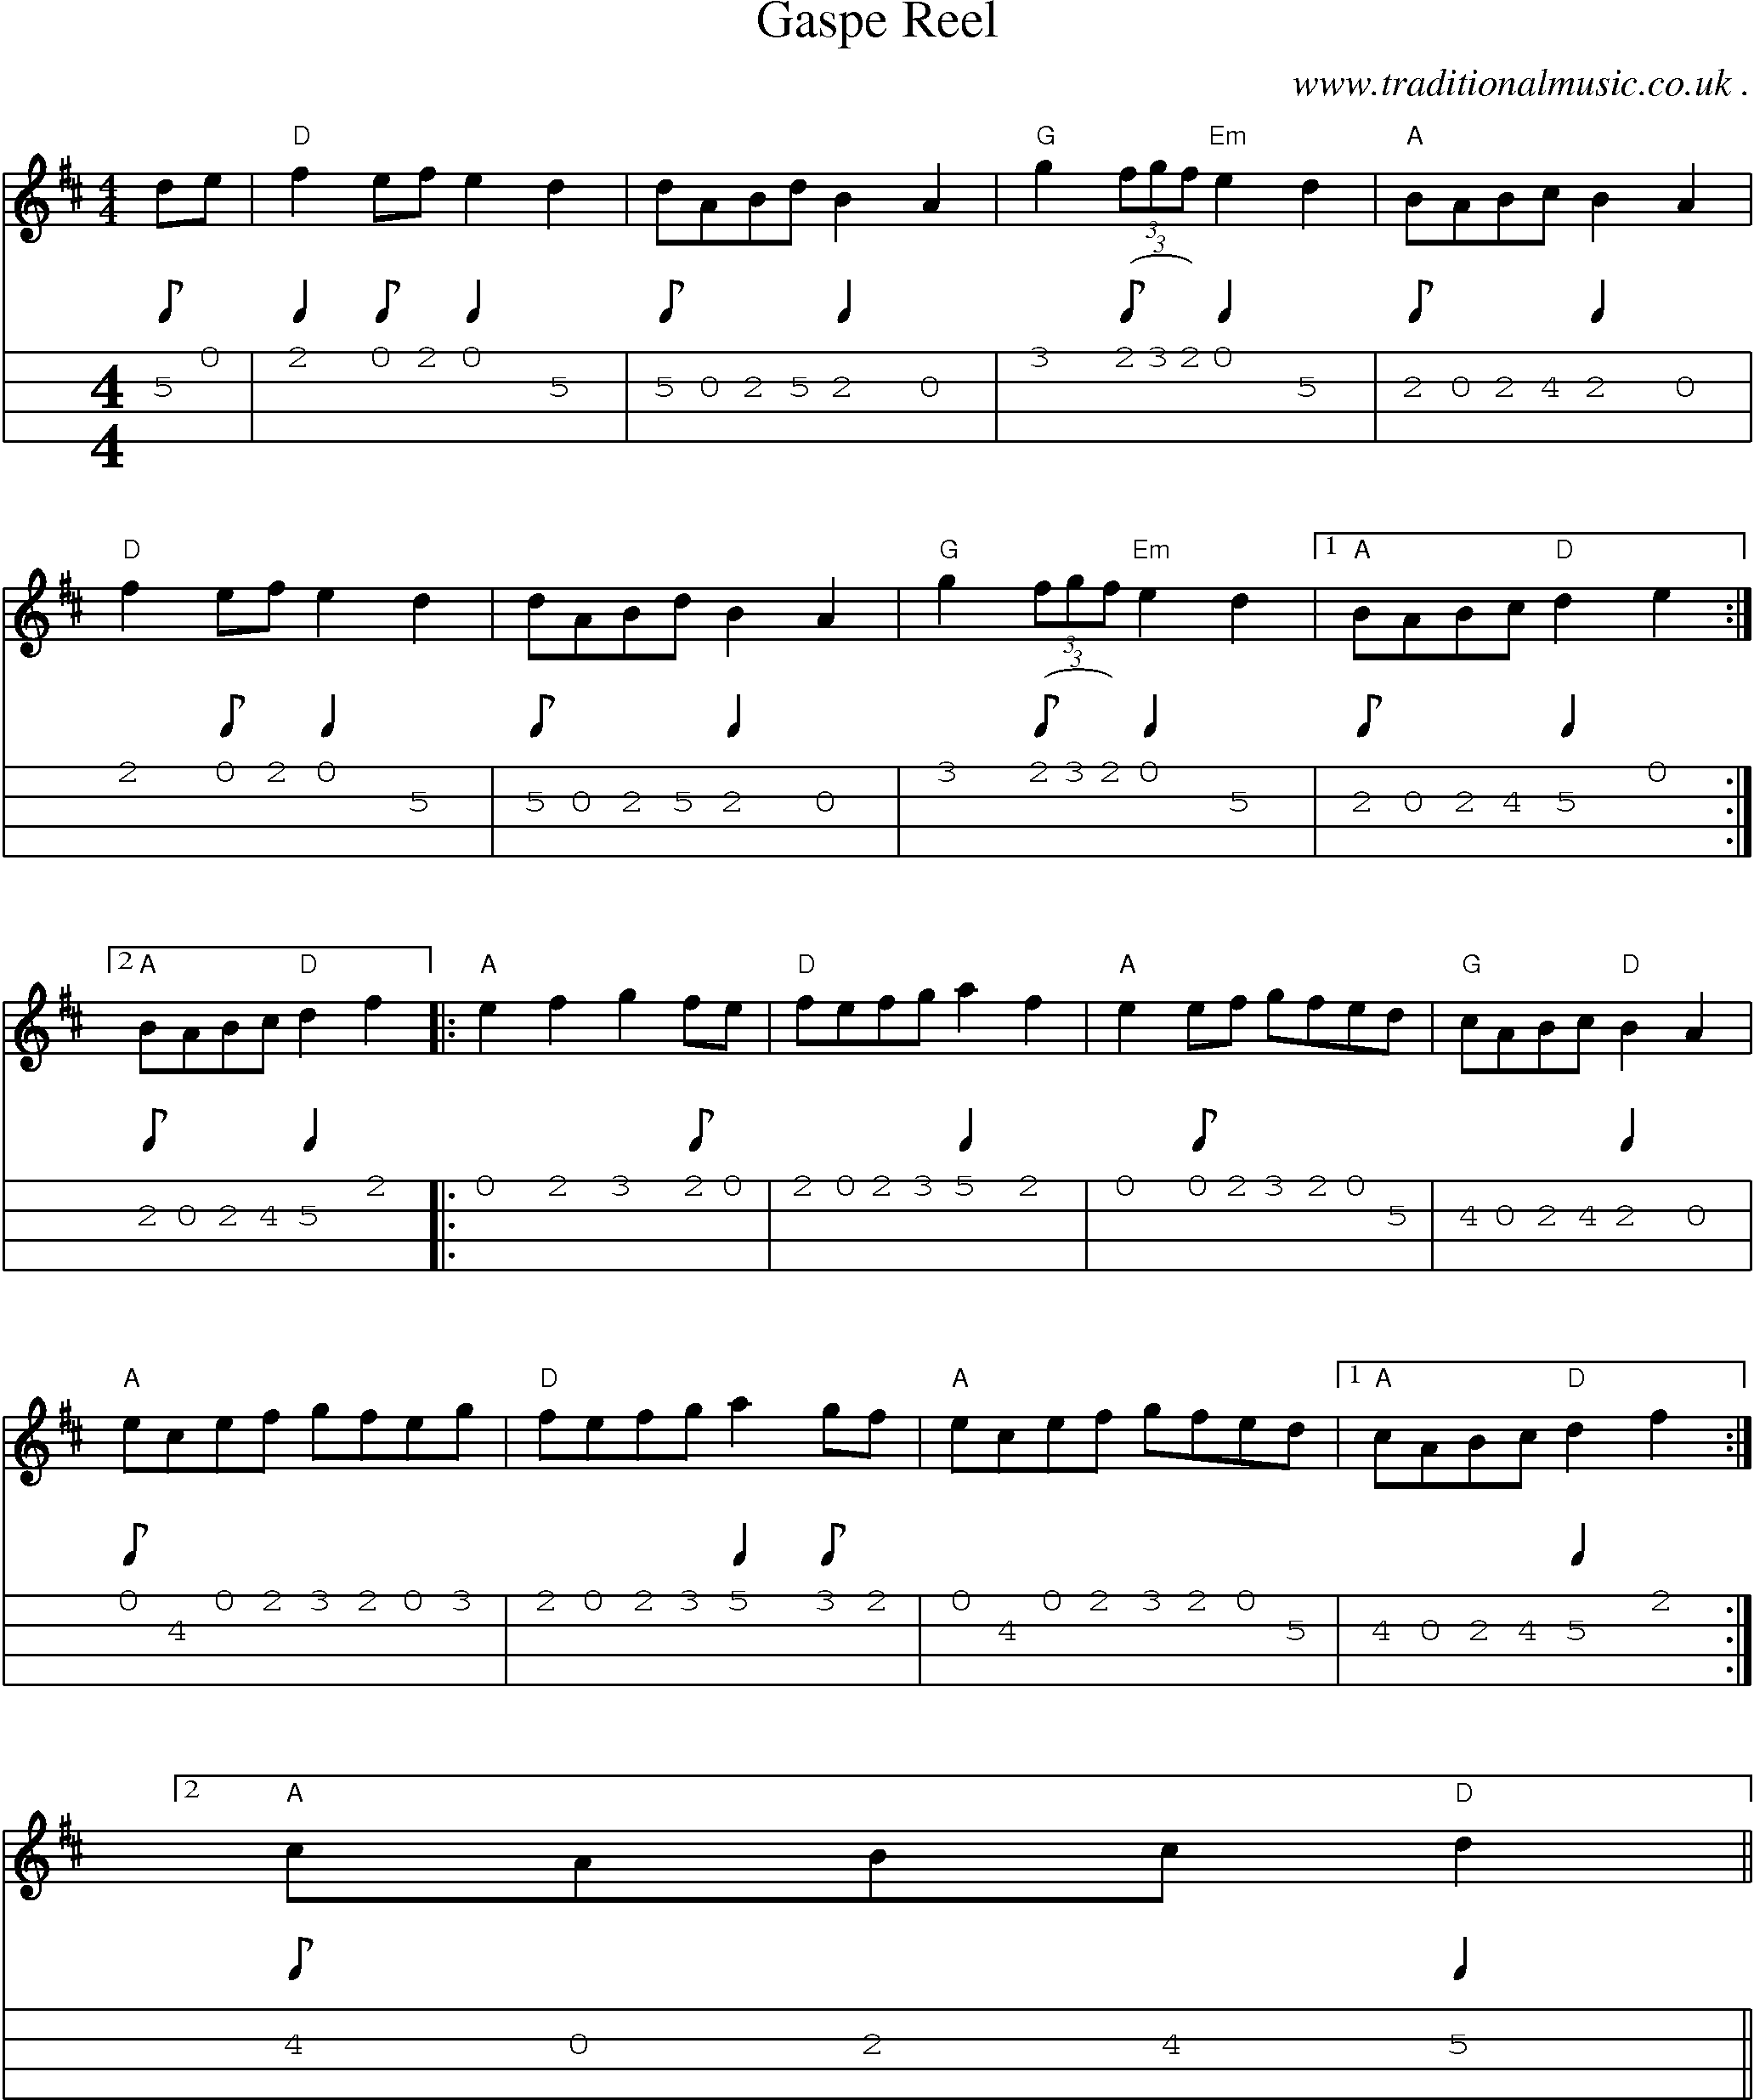 Music Score and Guitar Tabs for Gaspe Reel